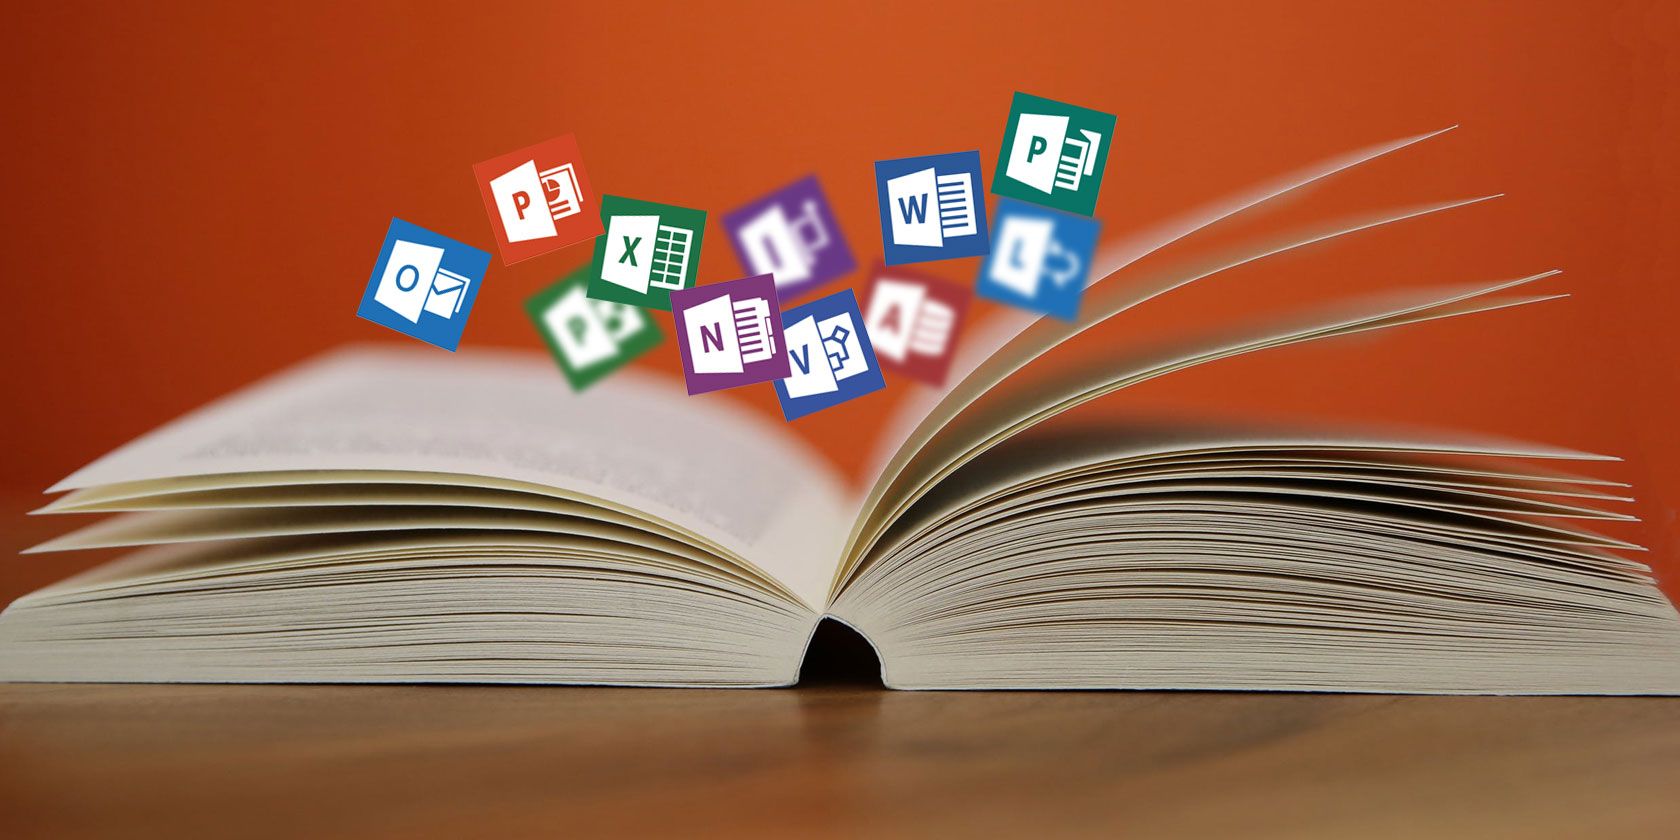 ms office for education